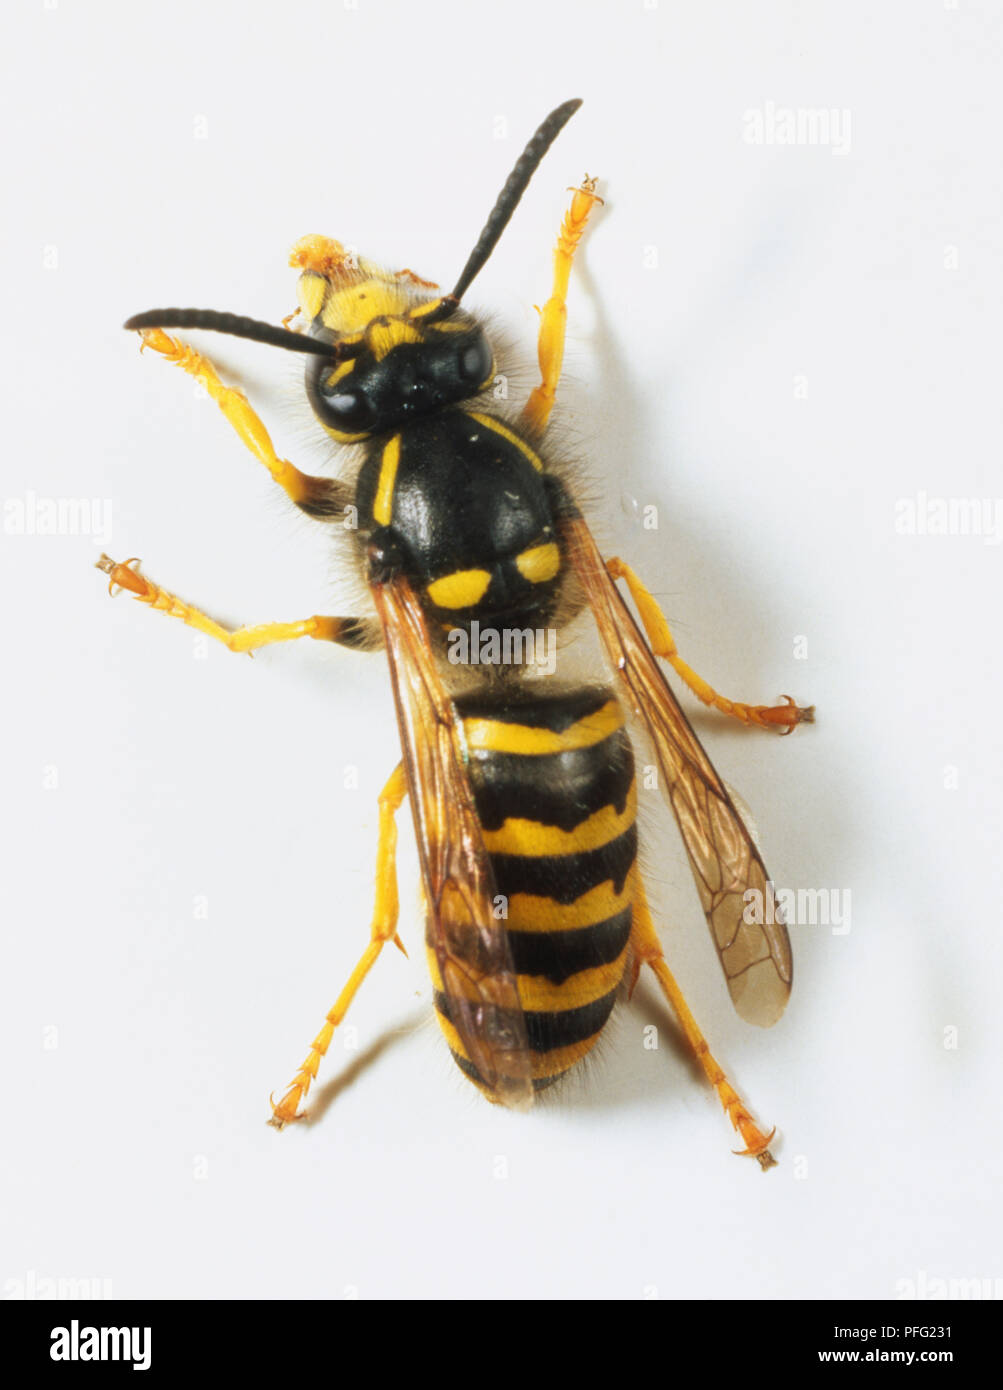 A wasp with black and yellow bands across its body and narrow translucent wings. Stock Photo